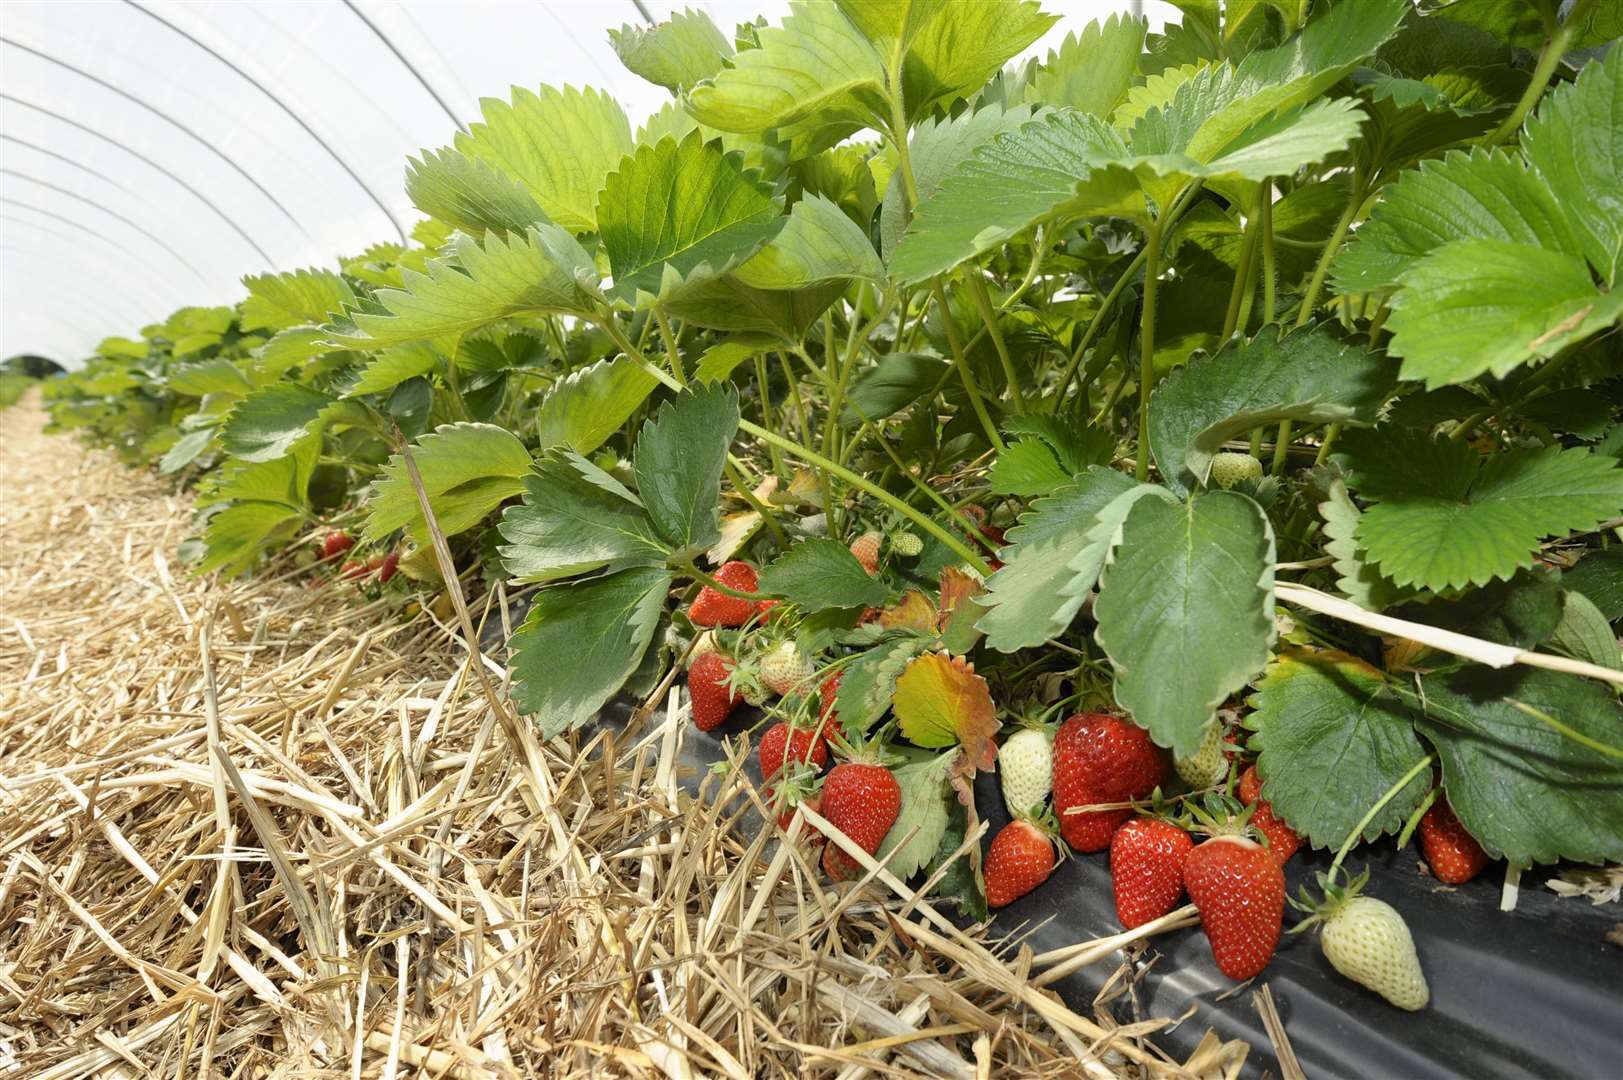 About 40% of all soft fruit produced in England, like strawberries, is grown in Kent